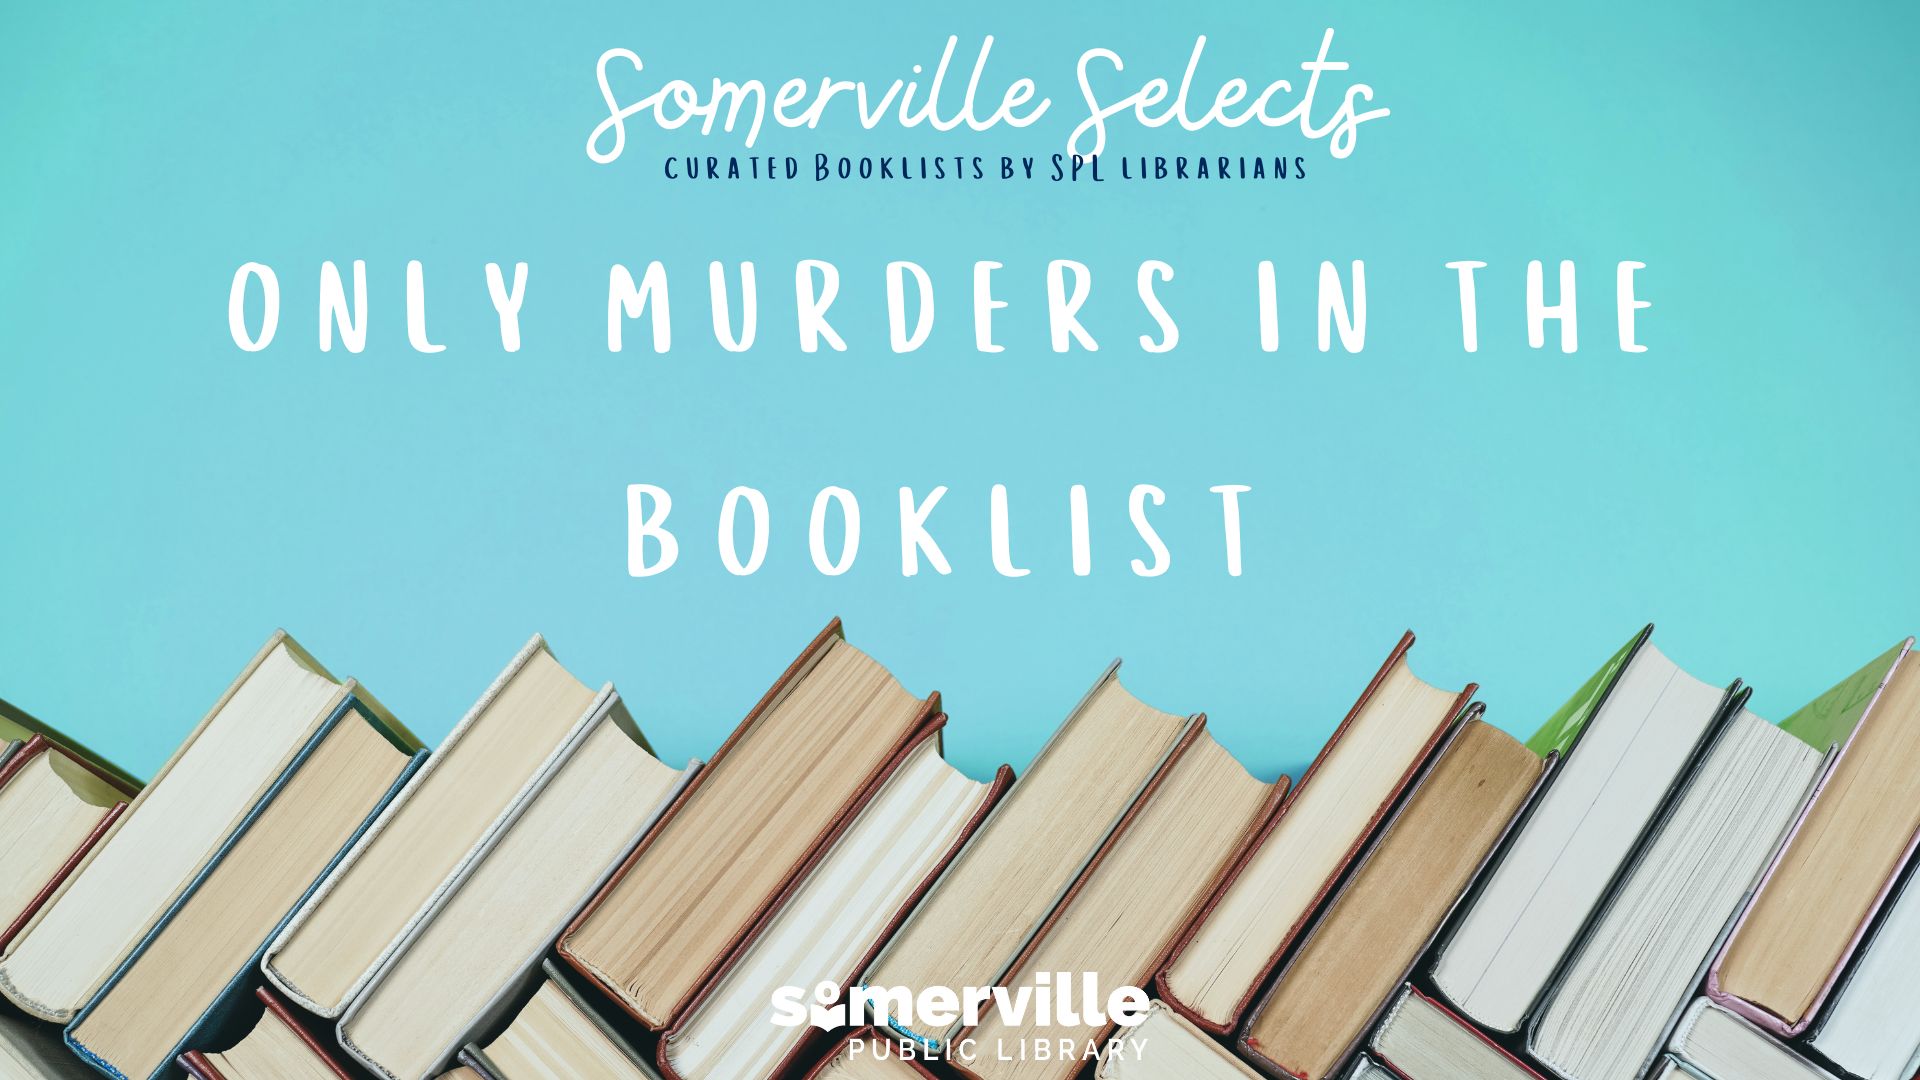 Only Murders in the Booklist